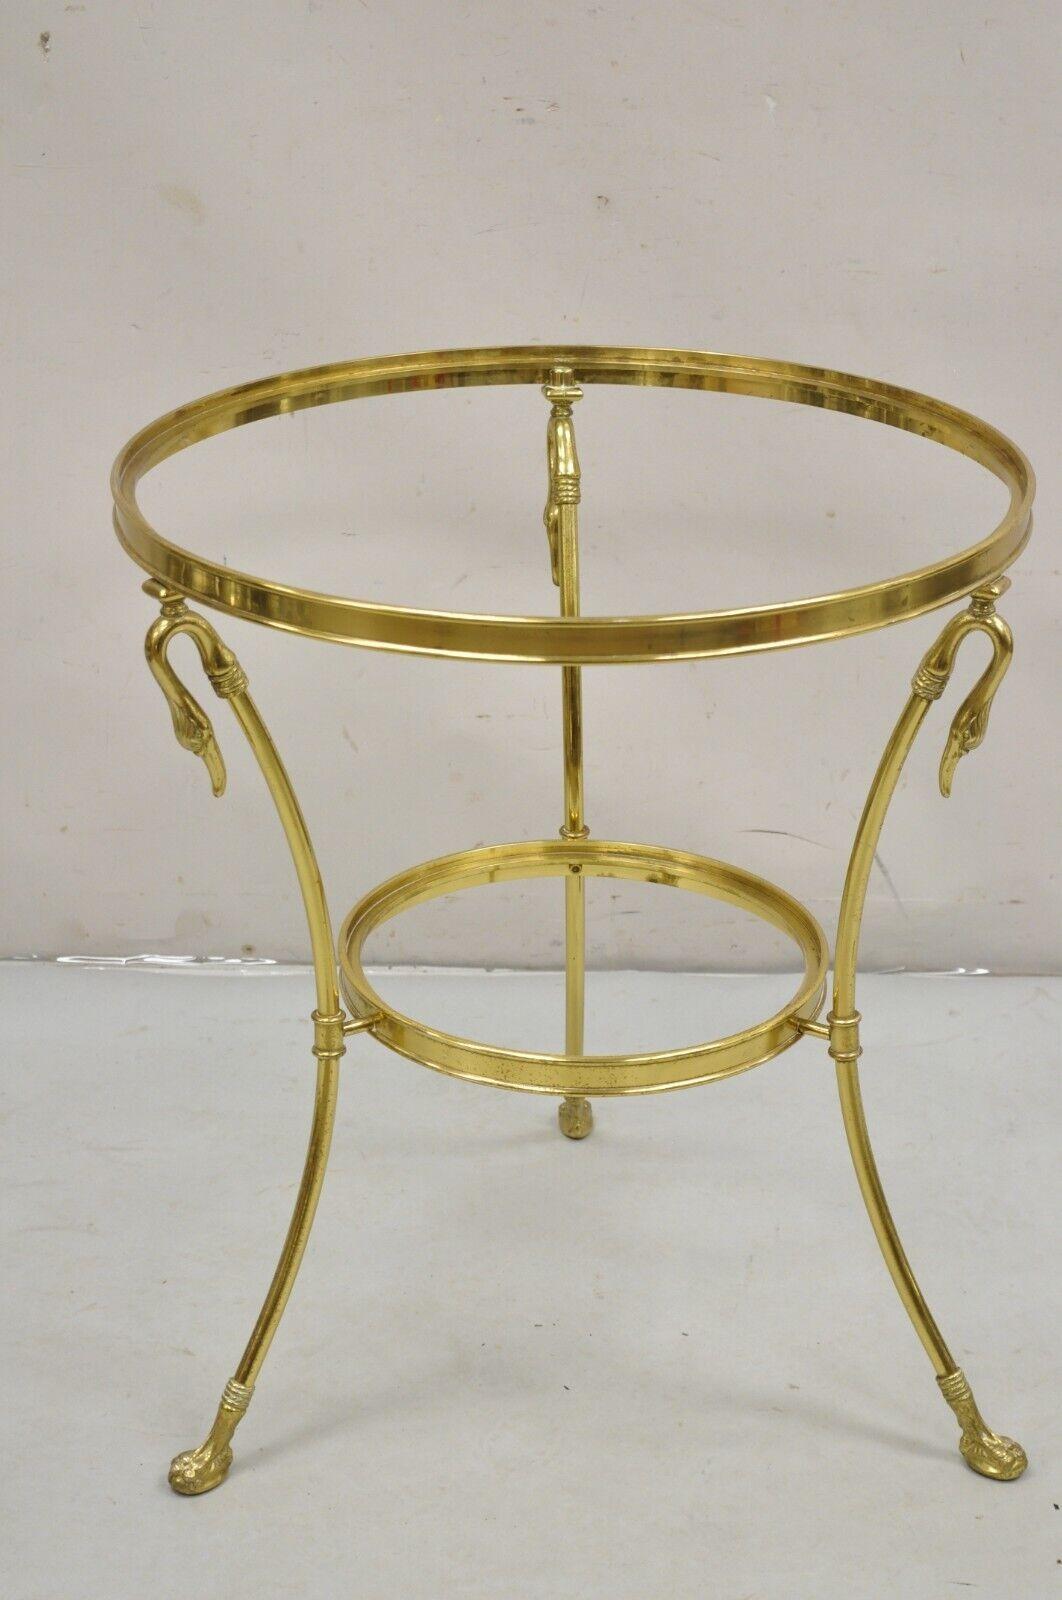 Italian Hollywood Regency Brass Swan Tripod 2 Tier Round Occasional Side Table For Sale 6